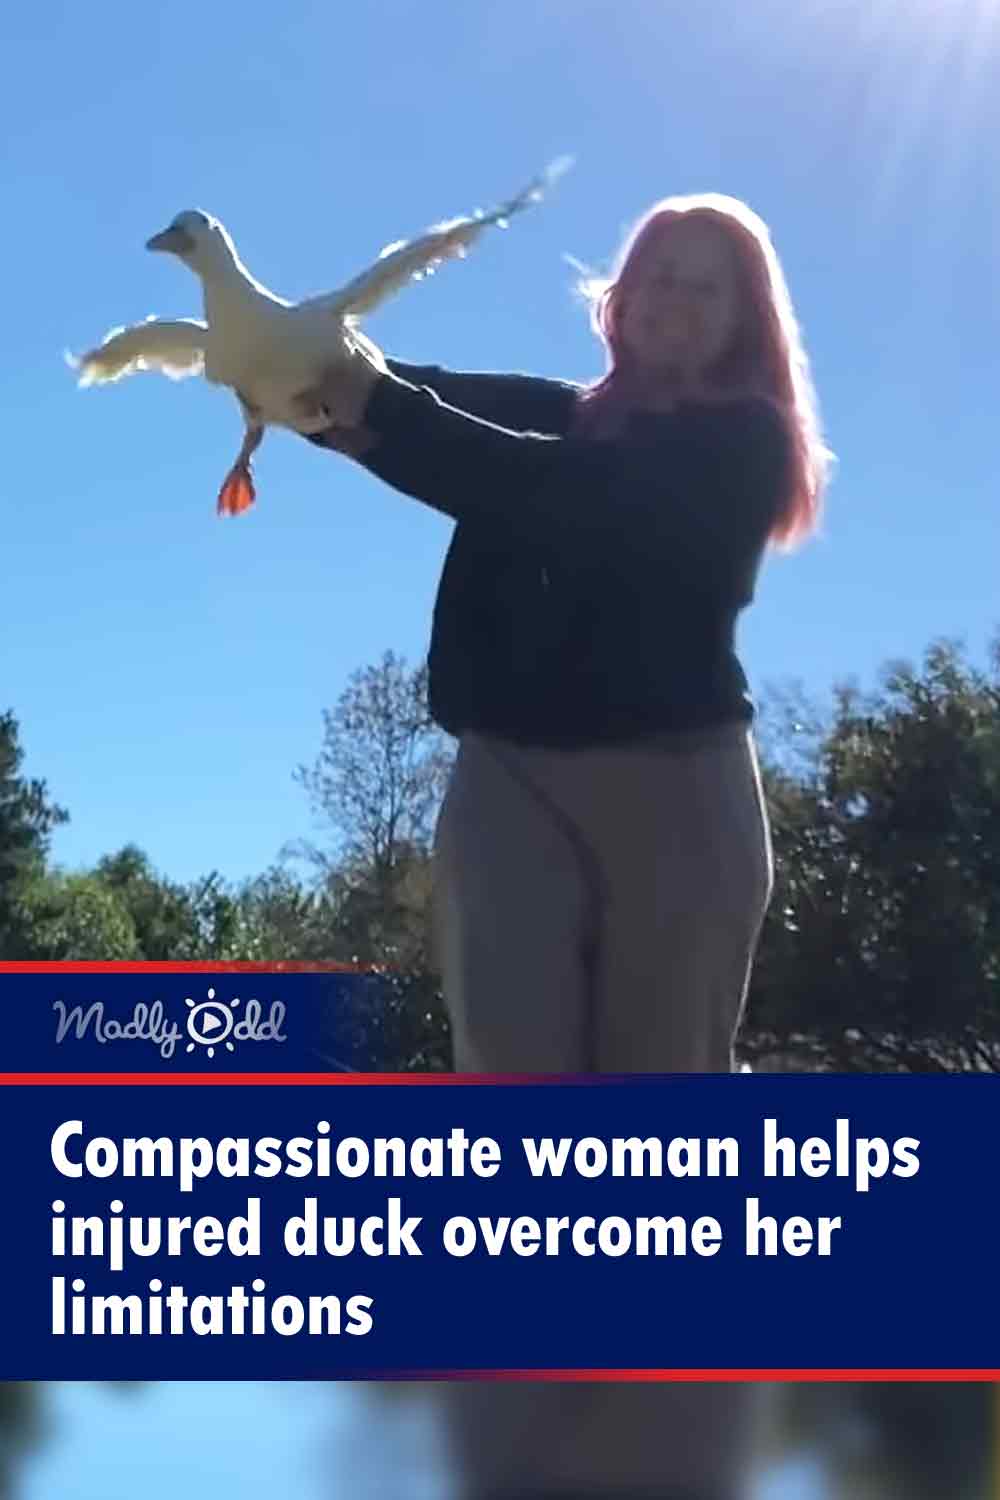 Compassionate woman helps injured duck overcome her limitations